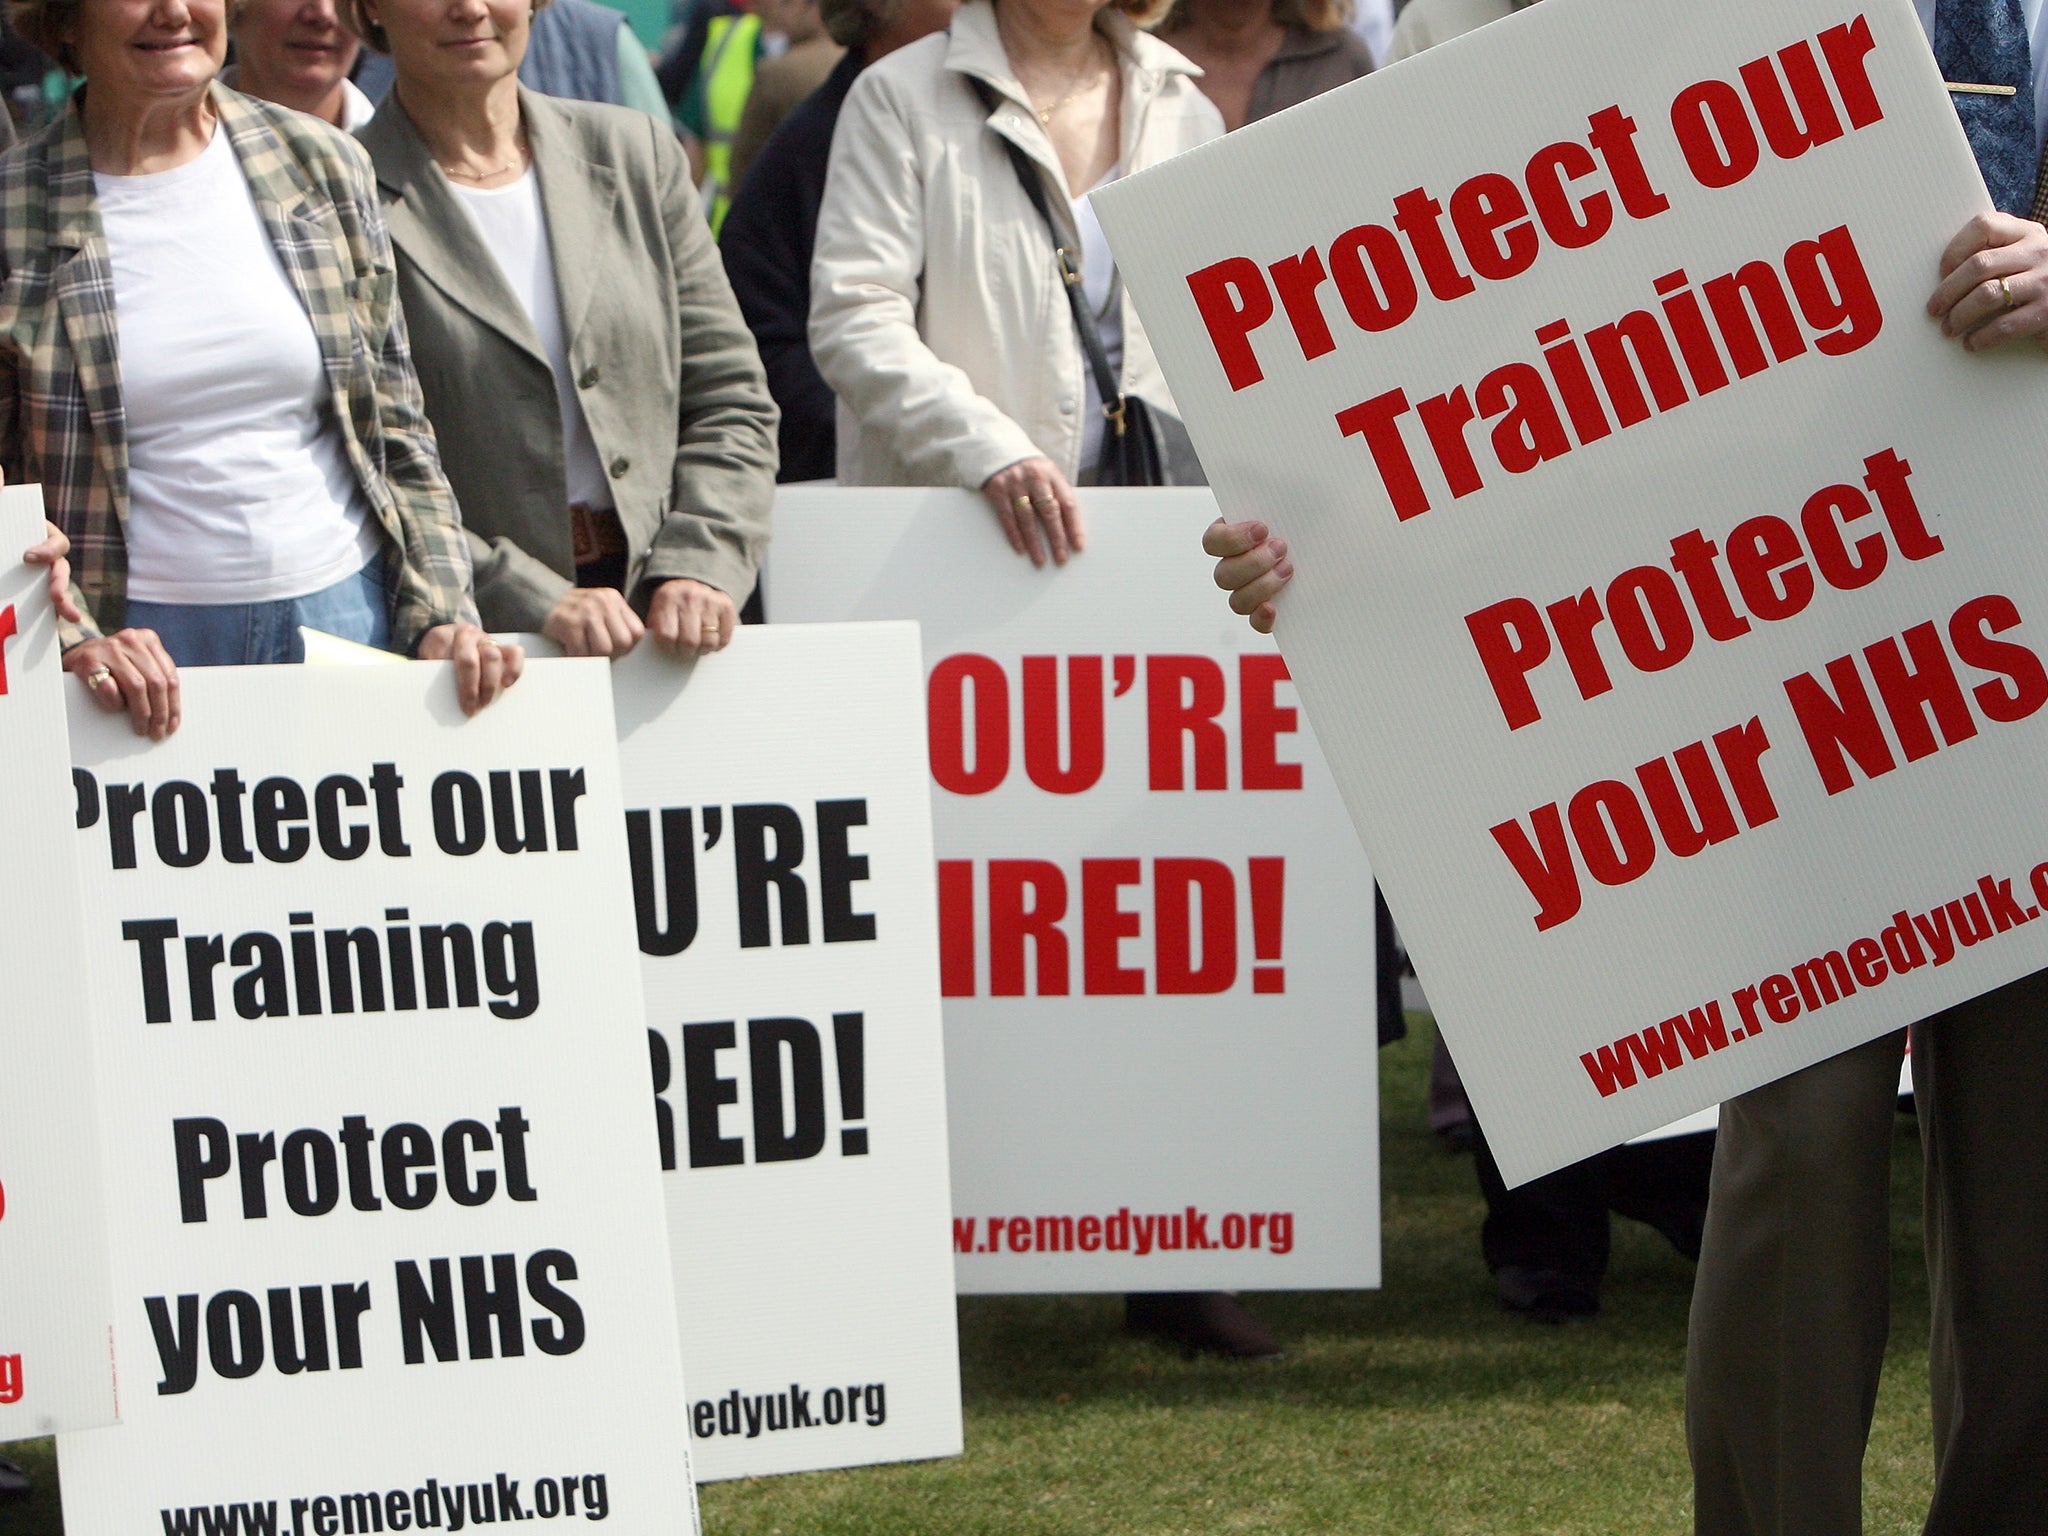 Junior doctors rallying outside Westminster in 2007 over unreasonable conditions for their training in UK hospitals. There is now the threat of strike action being taken over significant pay cuts due to the proposed new contracts